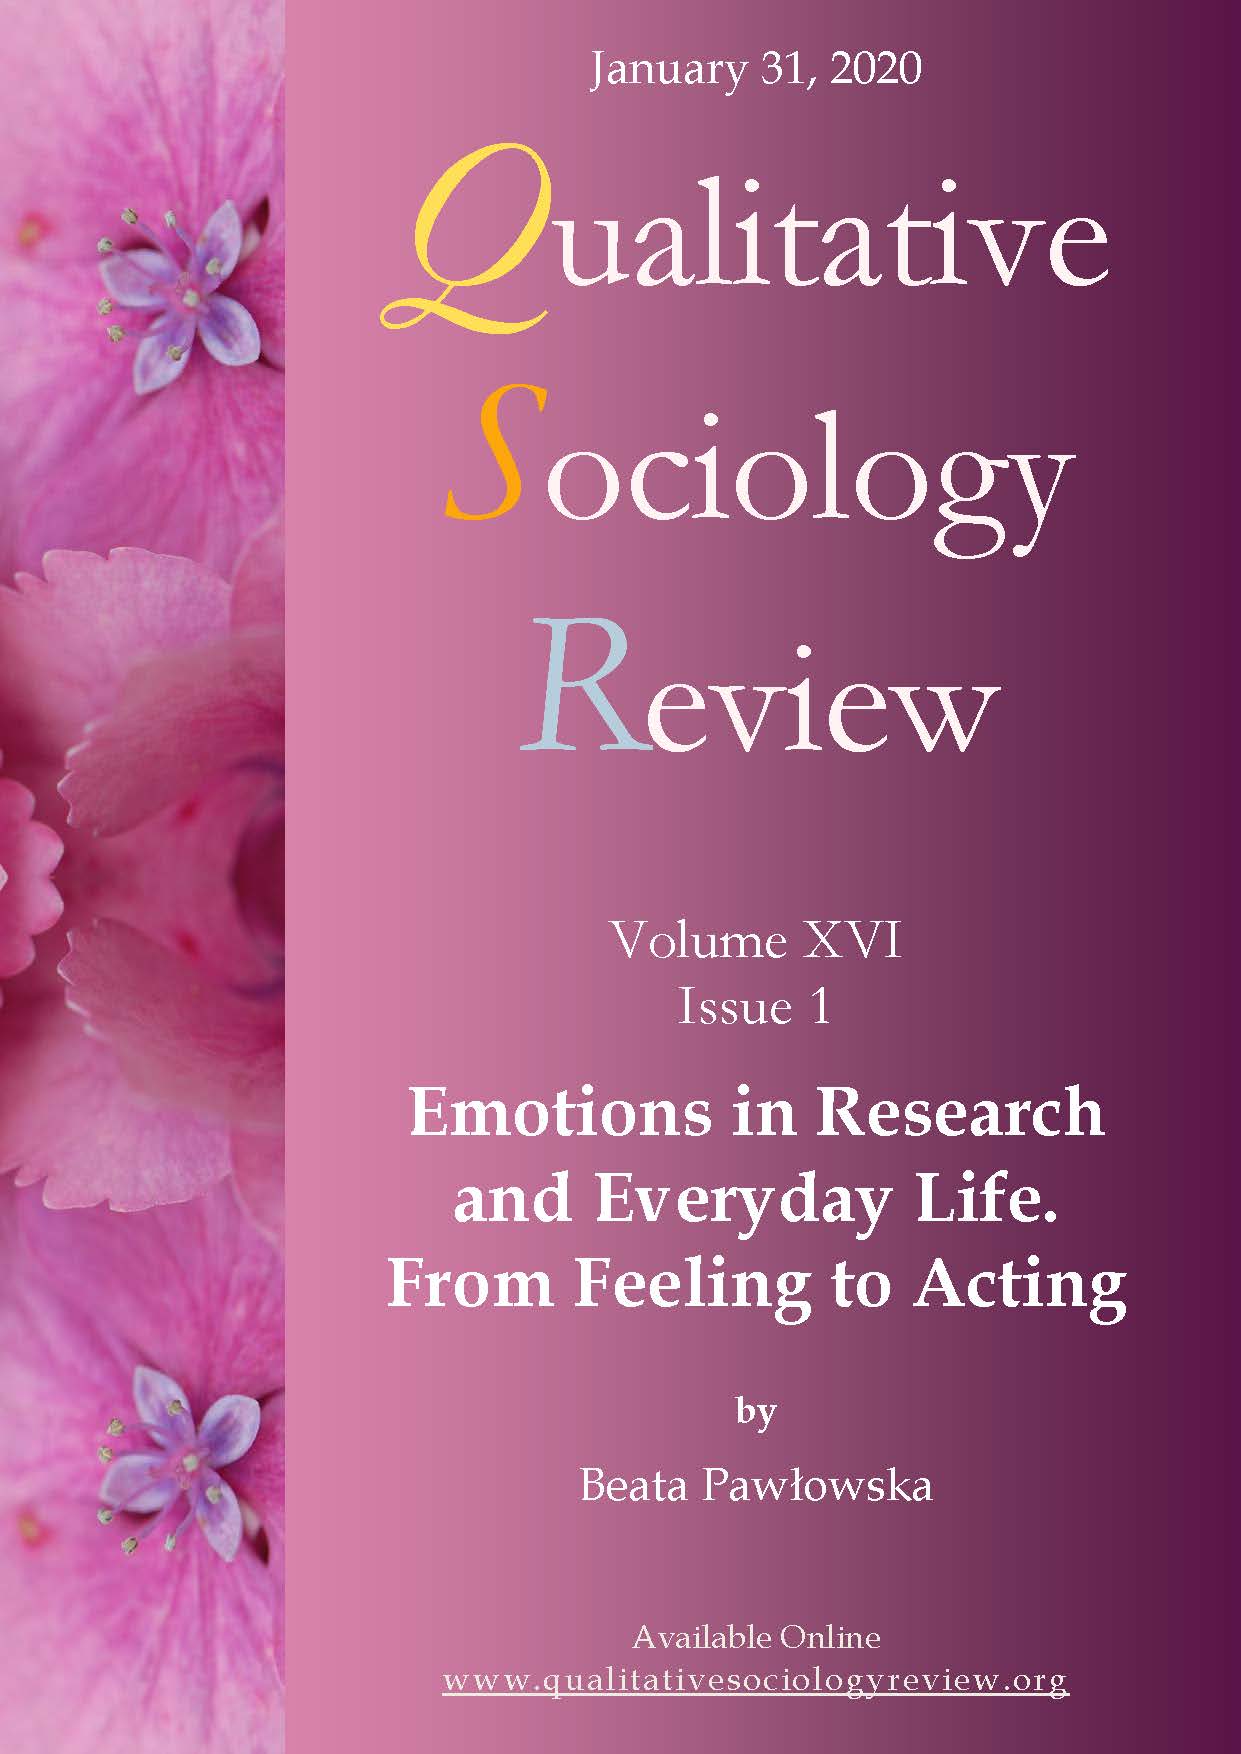 Emotions in Research and Everyday Life. From Feeling to Acting